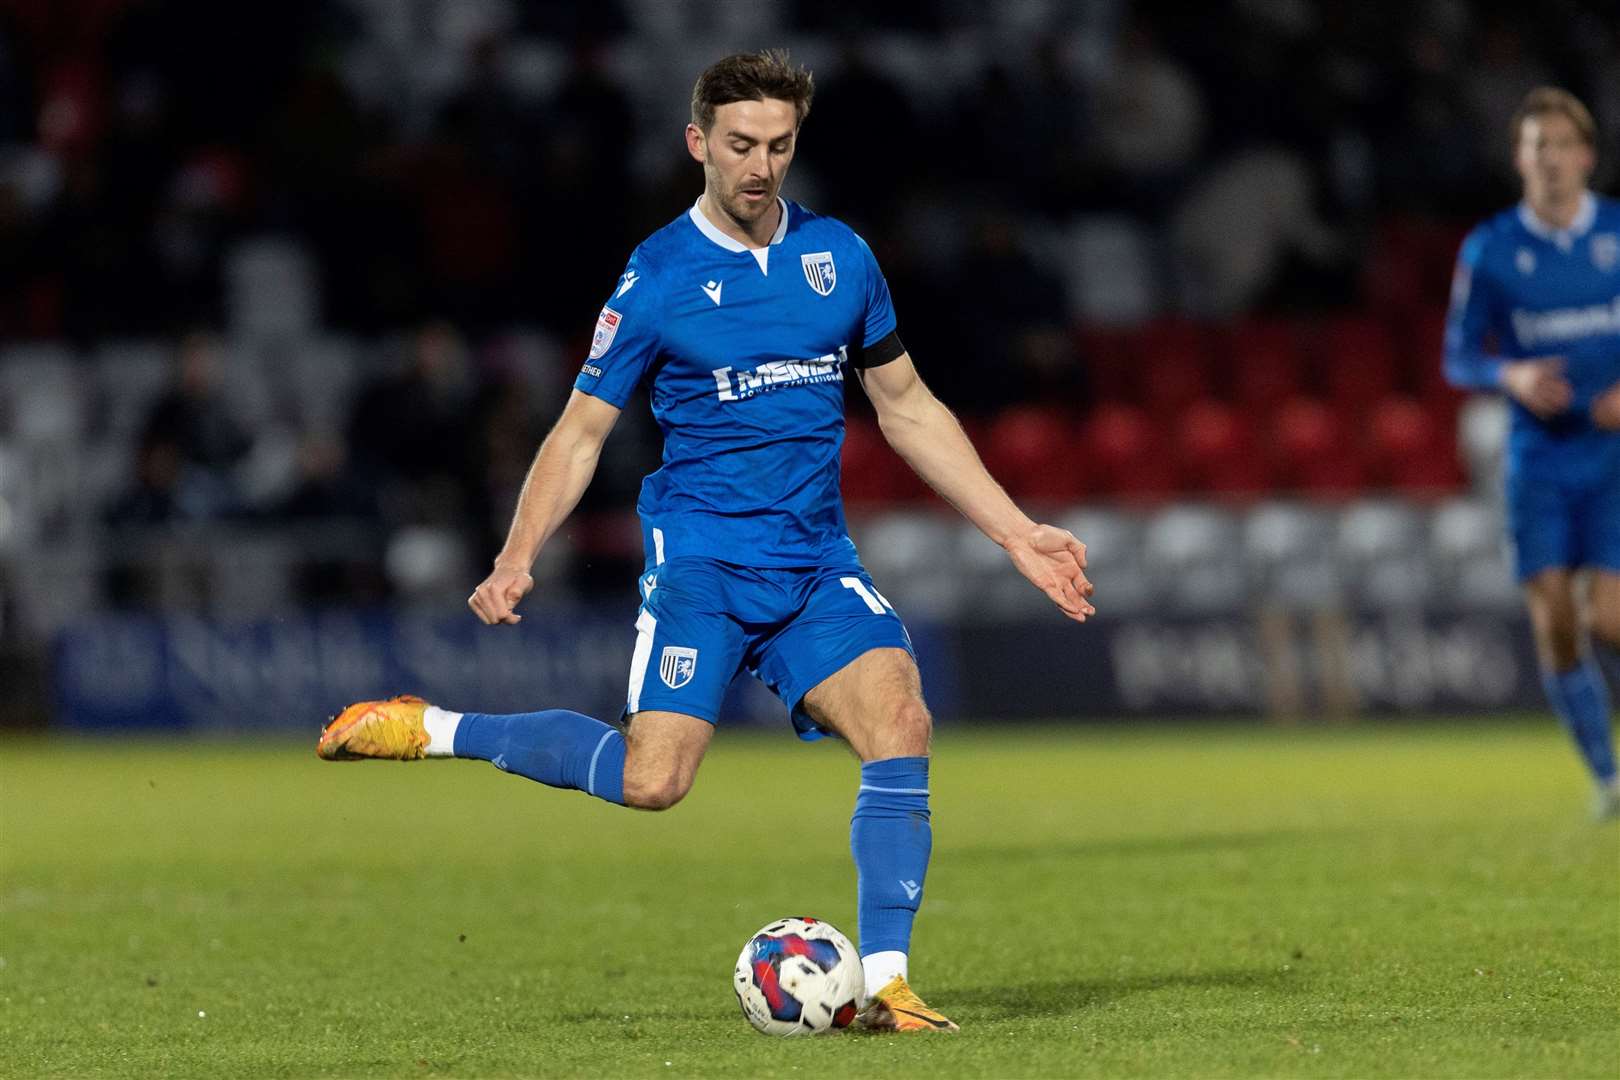 Robbie McKenzie has signed a new deal at Gillingham